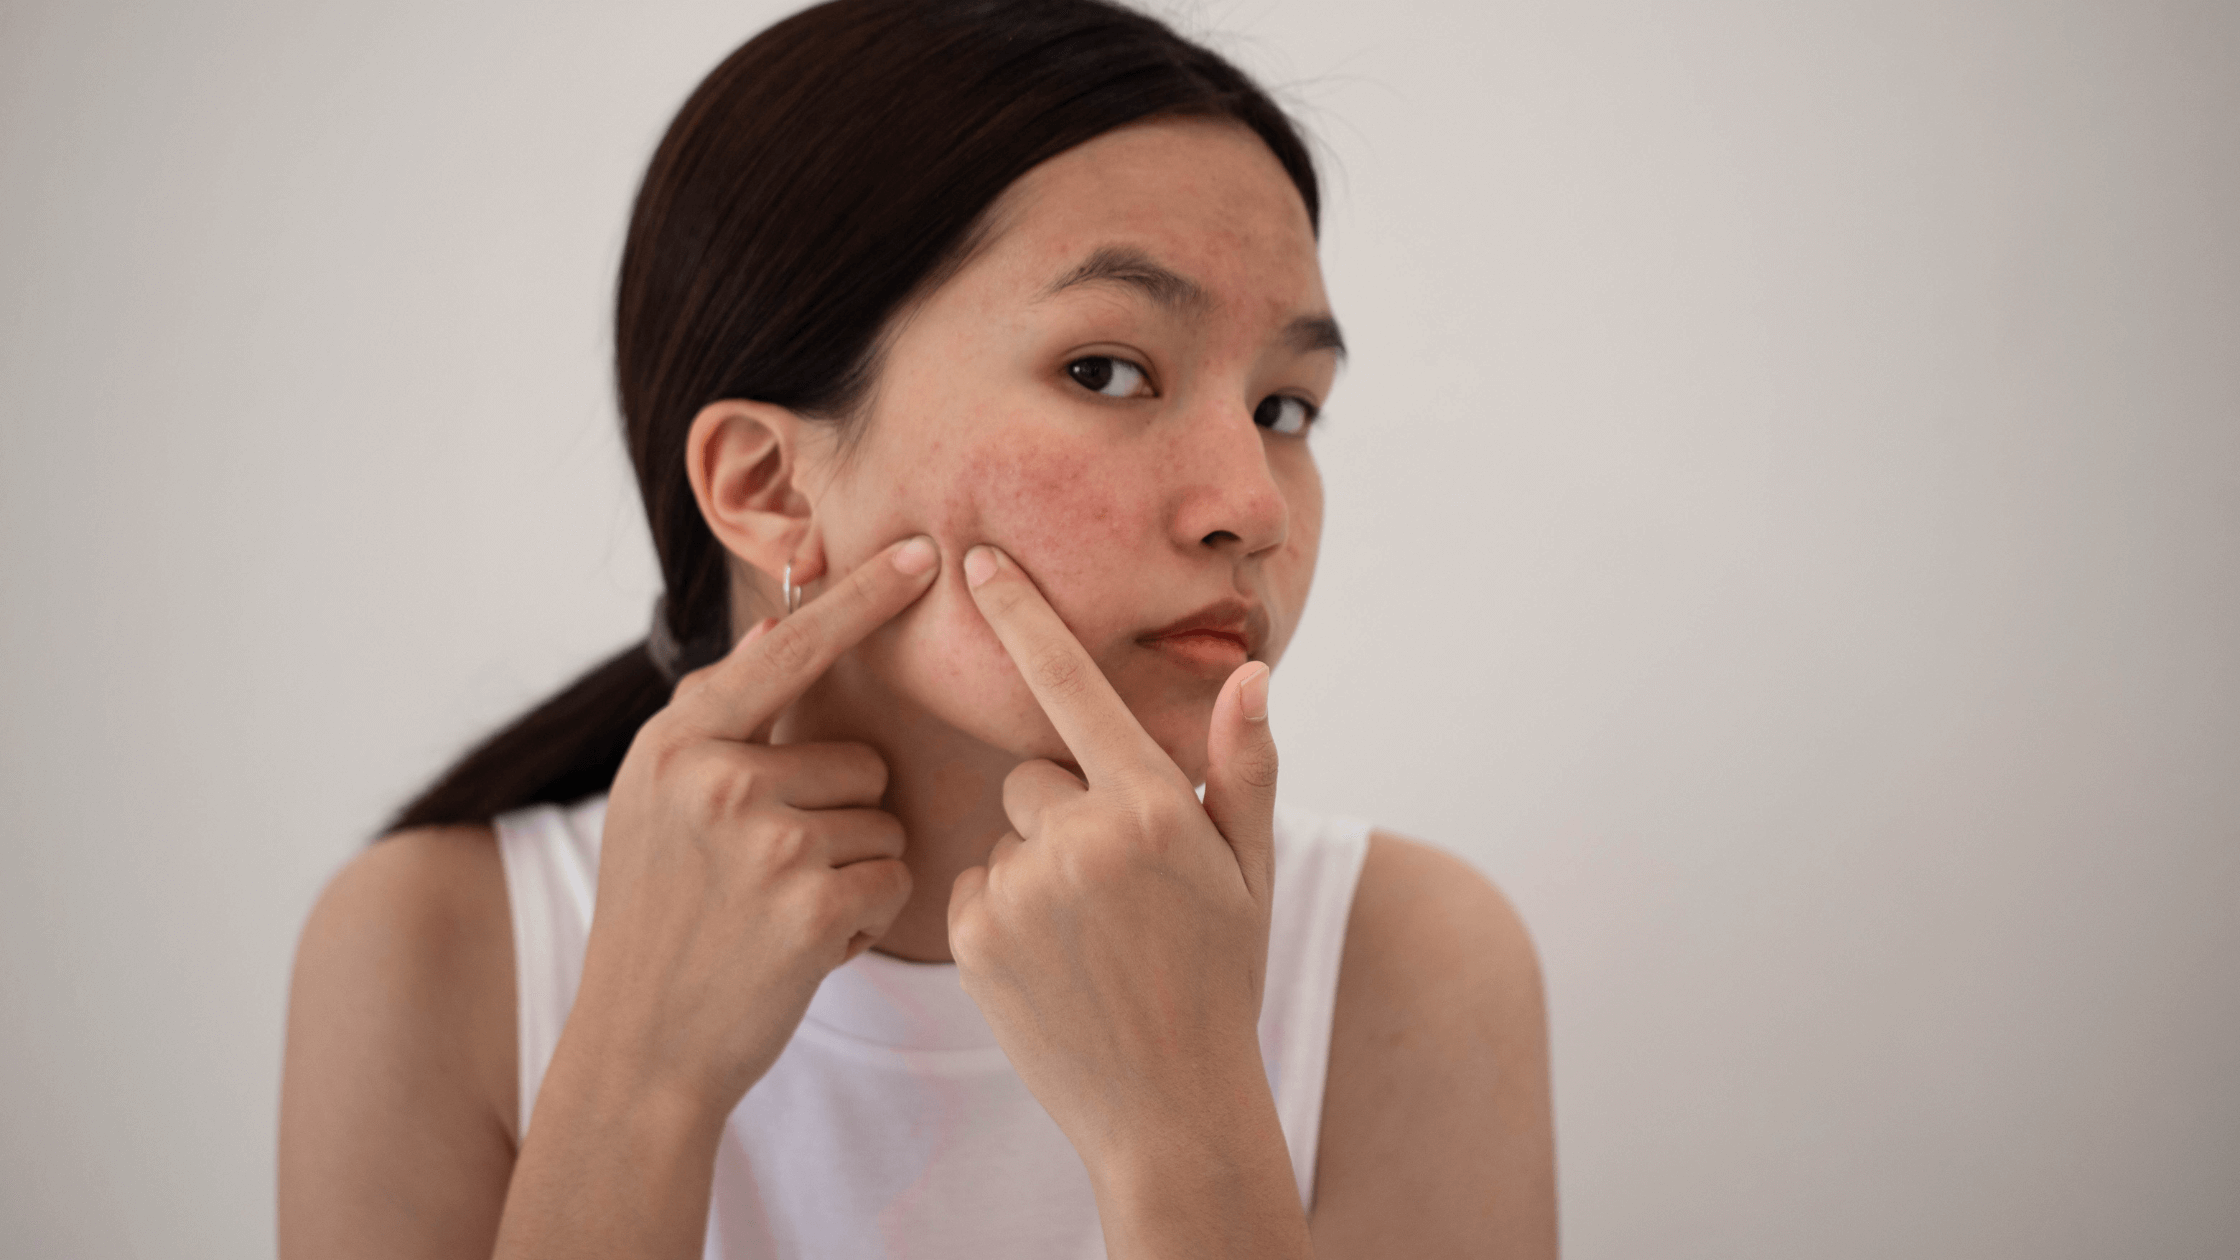 Is Your Acne Itchy? Try These 3 Treatments!